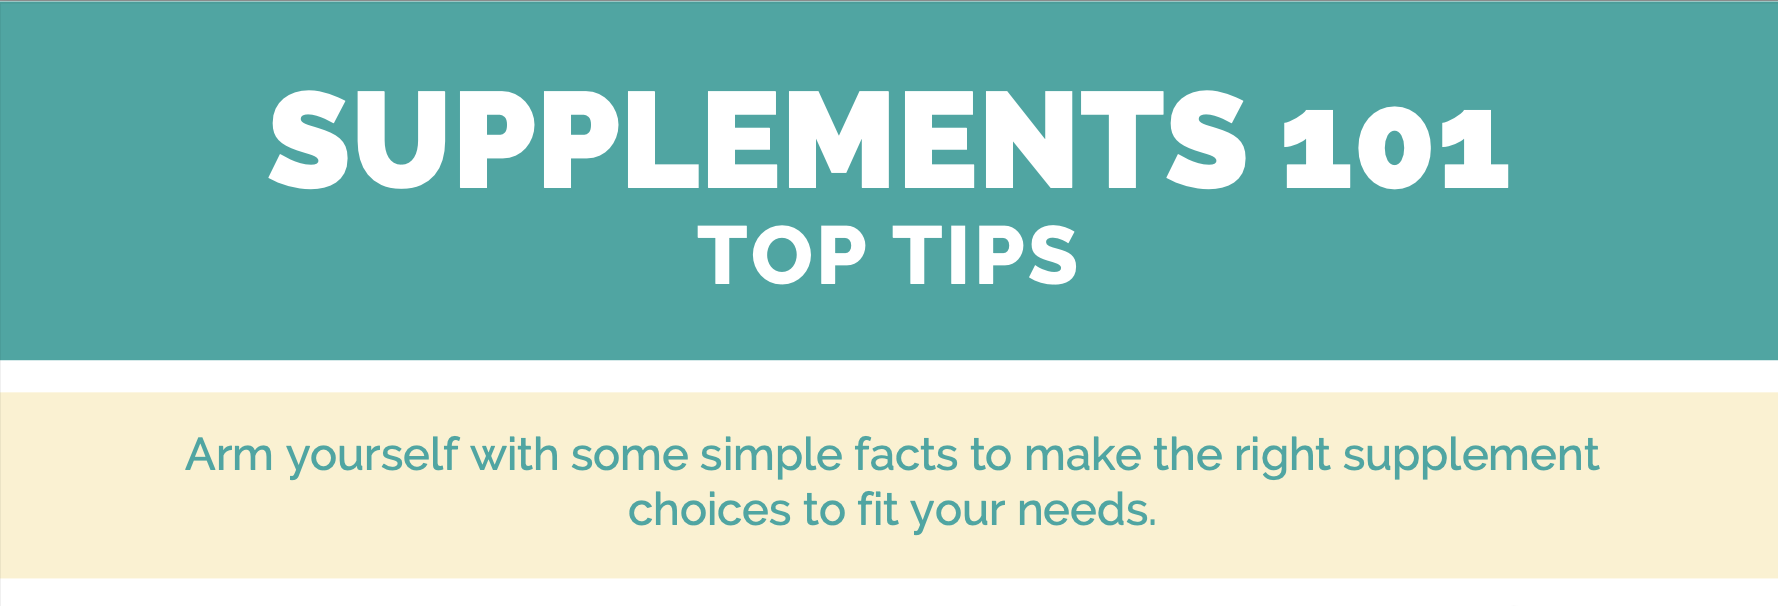 Supplement Top Tips Page Banner | Featured Image for Recipe Packs Page by AB Fitness Hub.